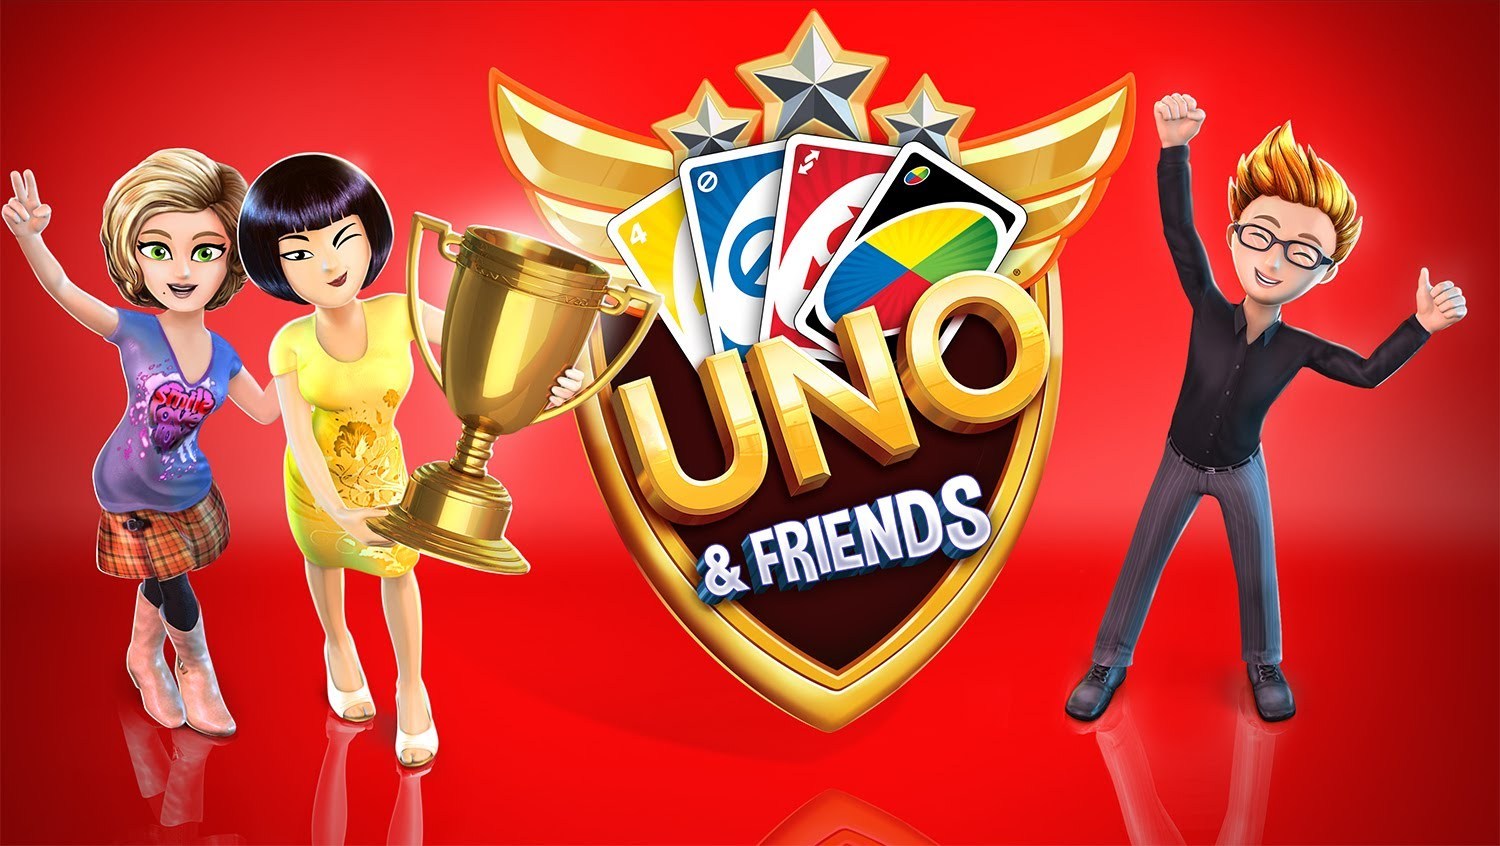 play uno online with friends on computer